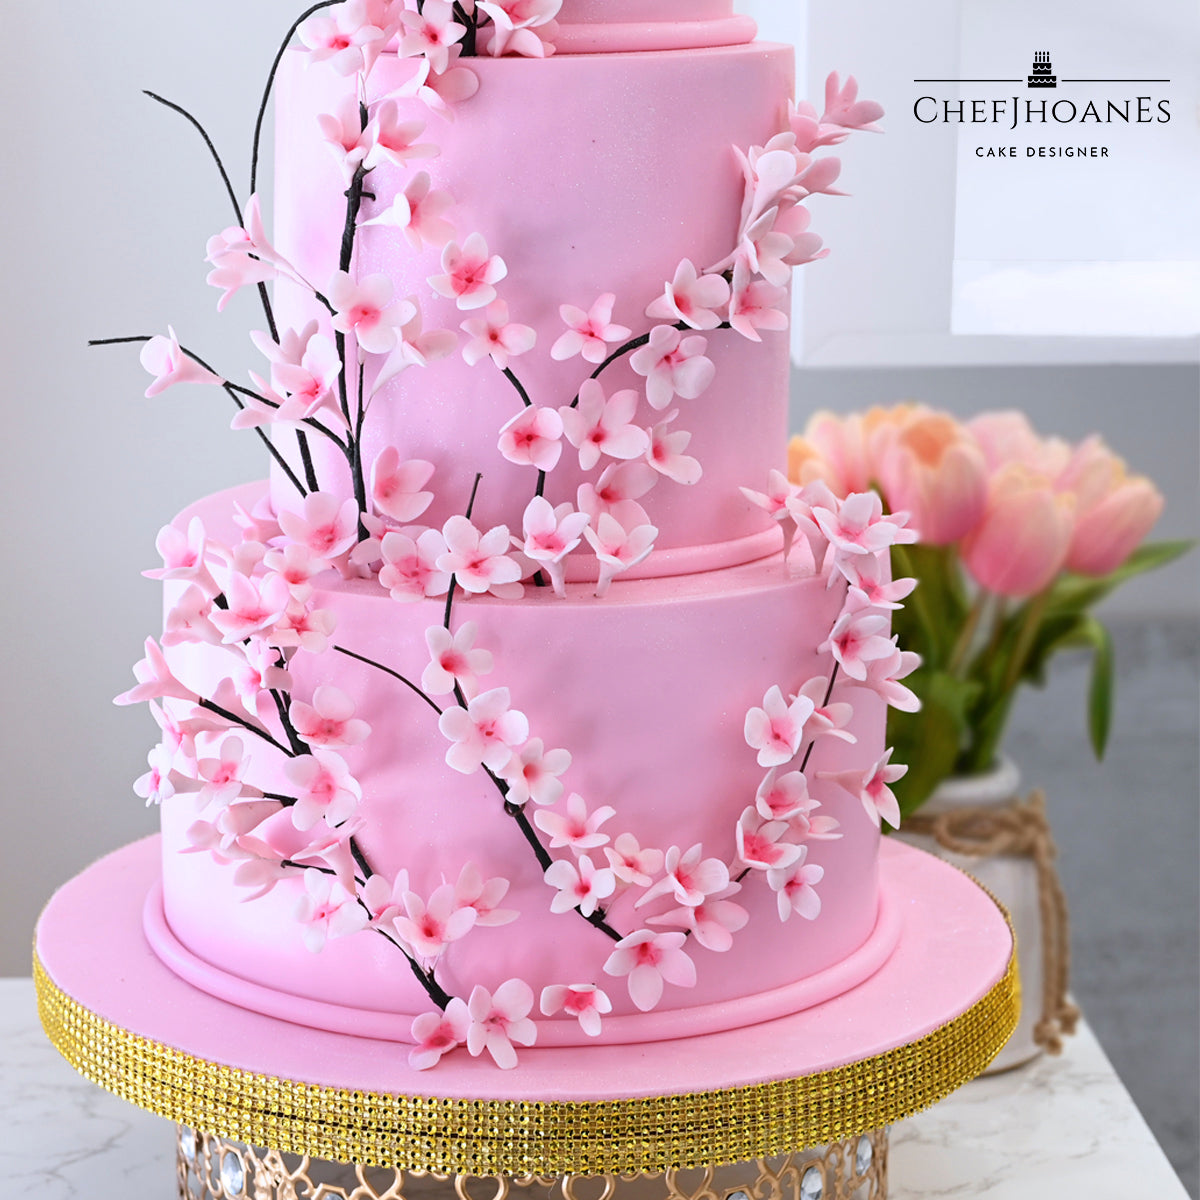 Cherry blossom cake. Feed 100 people.